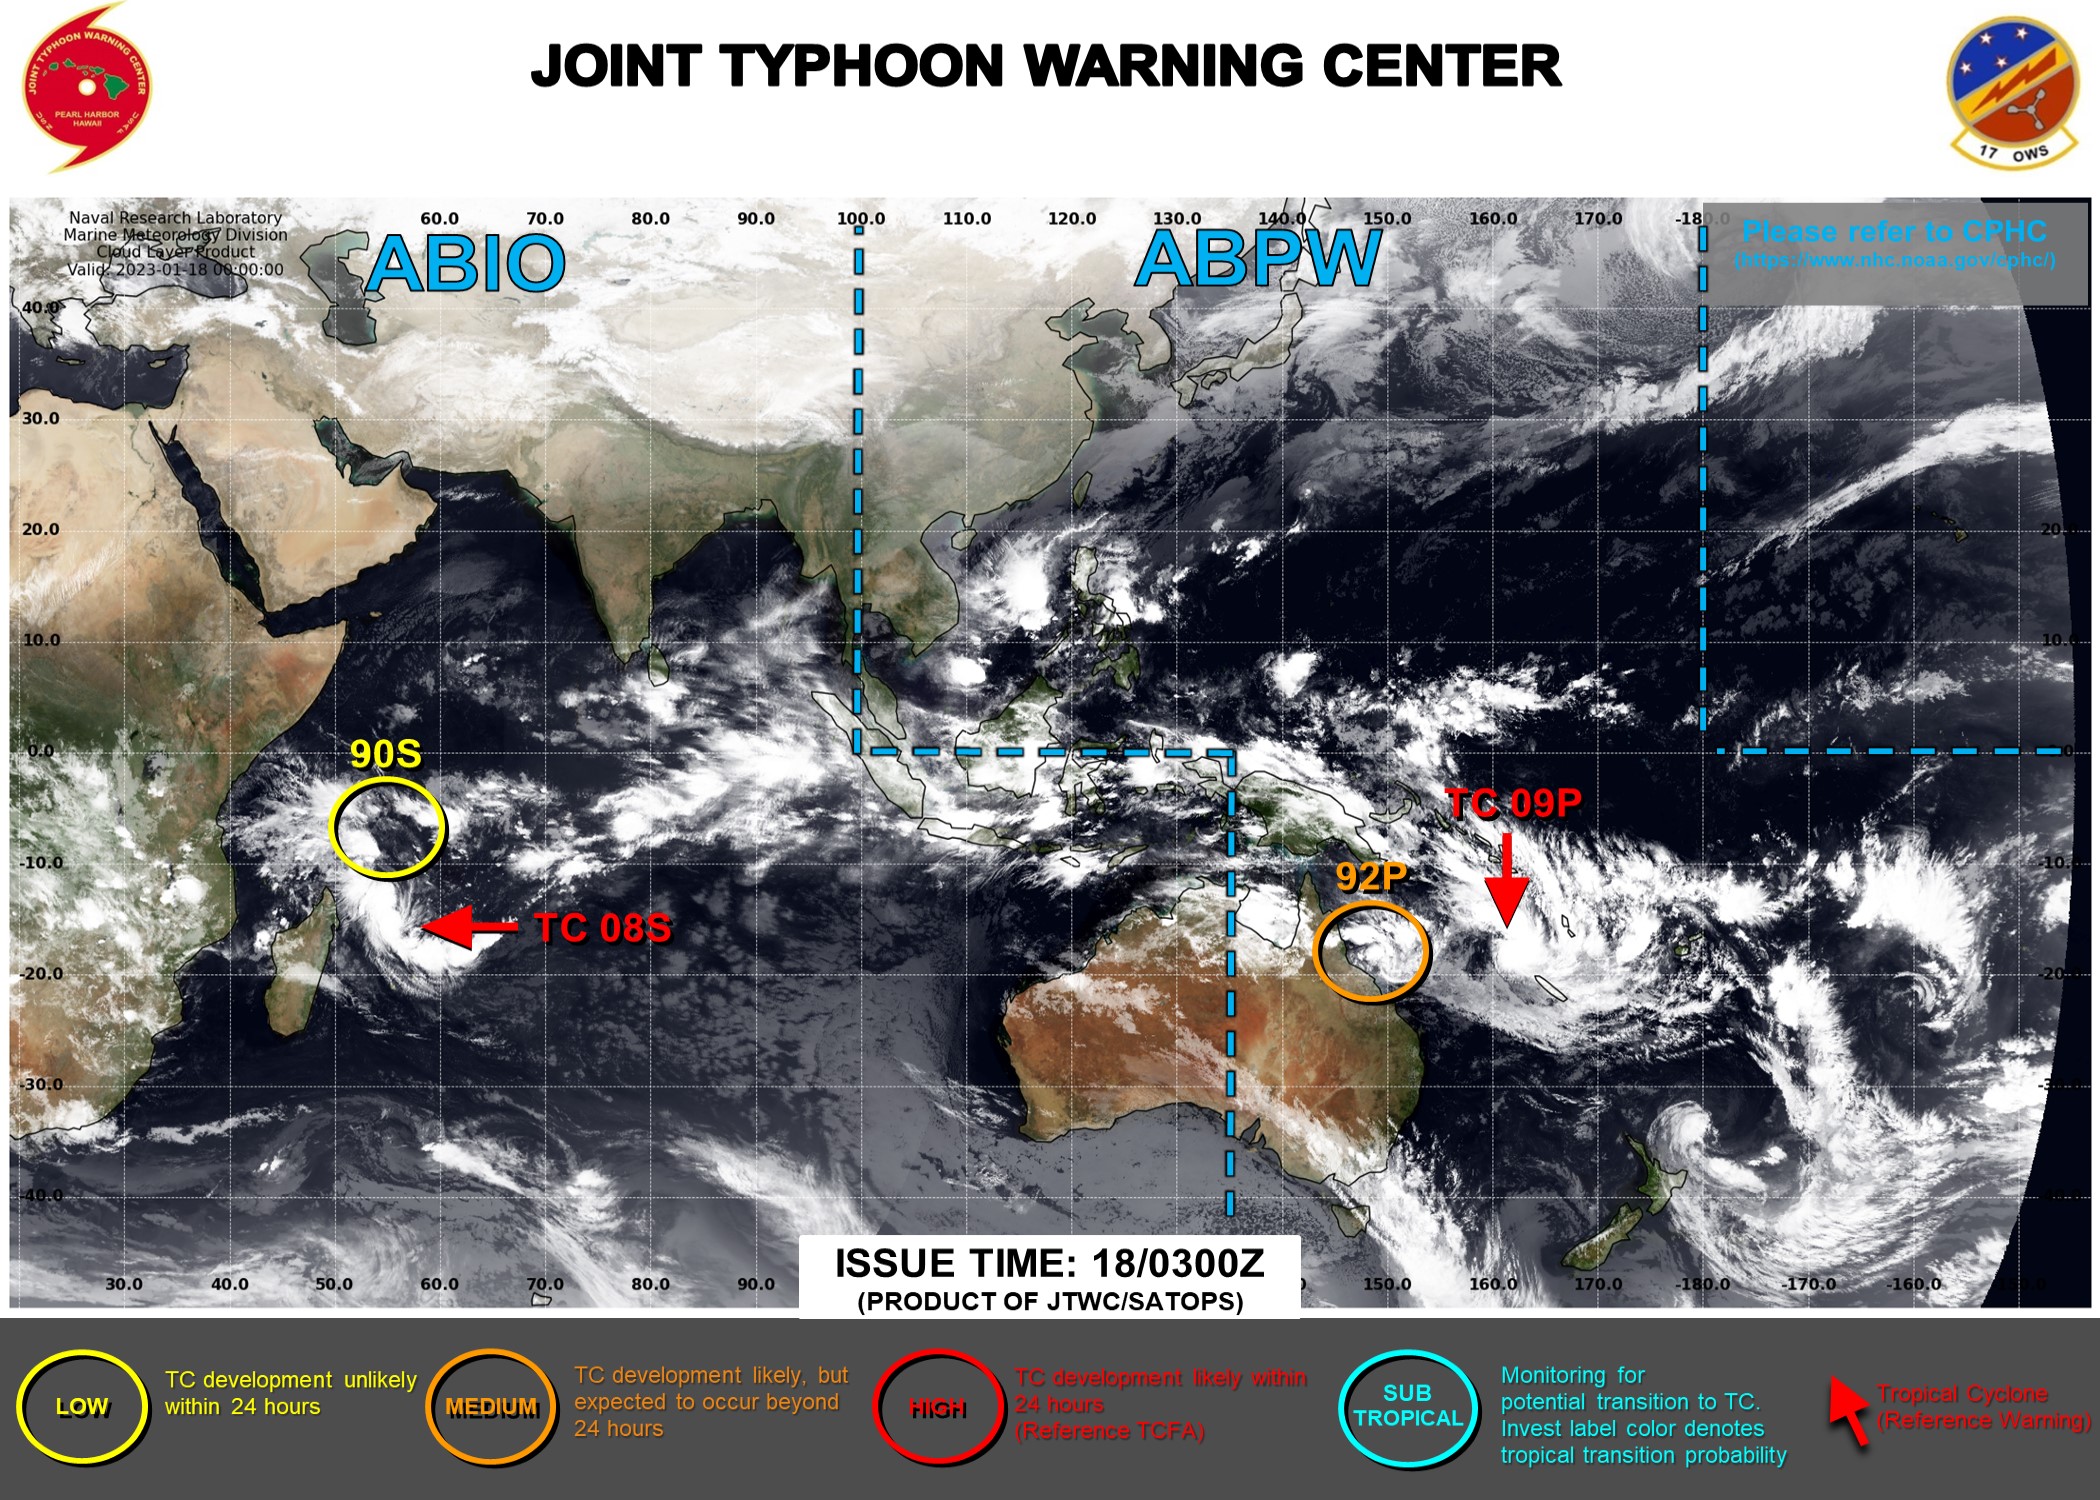 JTWC IS ISSUING 6HOURLY WARNINGS ON TC 09P AND 12HOURLY WARNINGS ON TC 08S. 3HOURLY SATELLITE BULLETINS ARE ISSUED ON BOTH SYSTEMS.